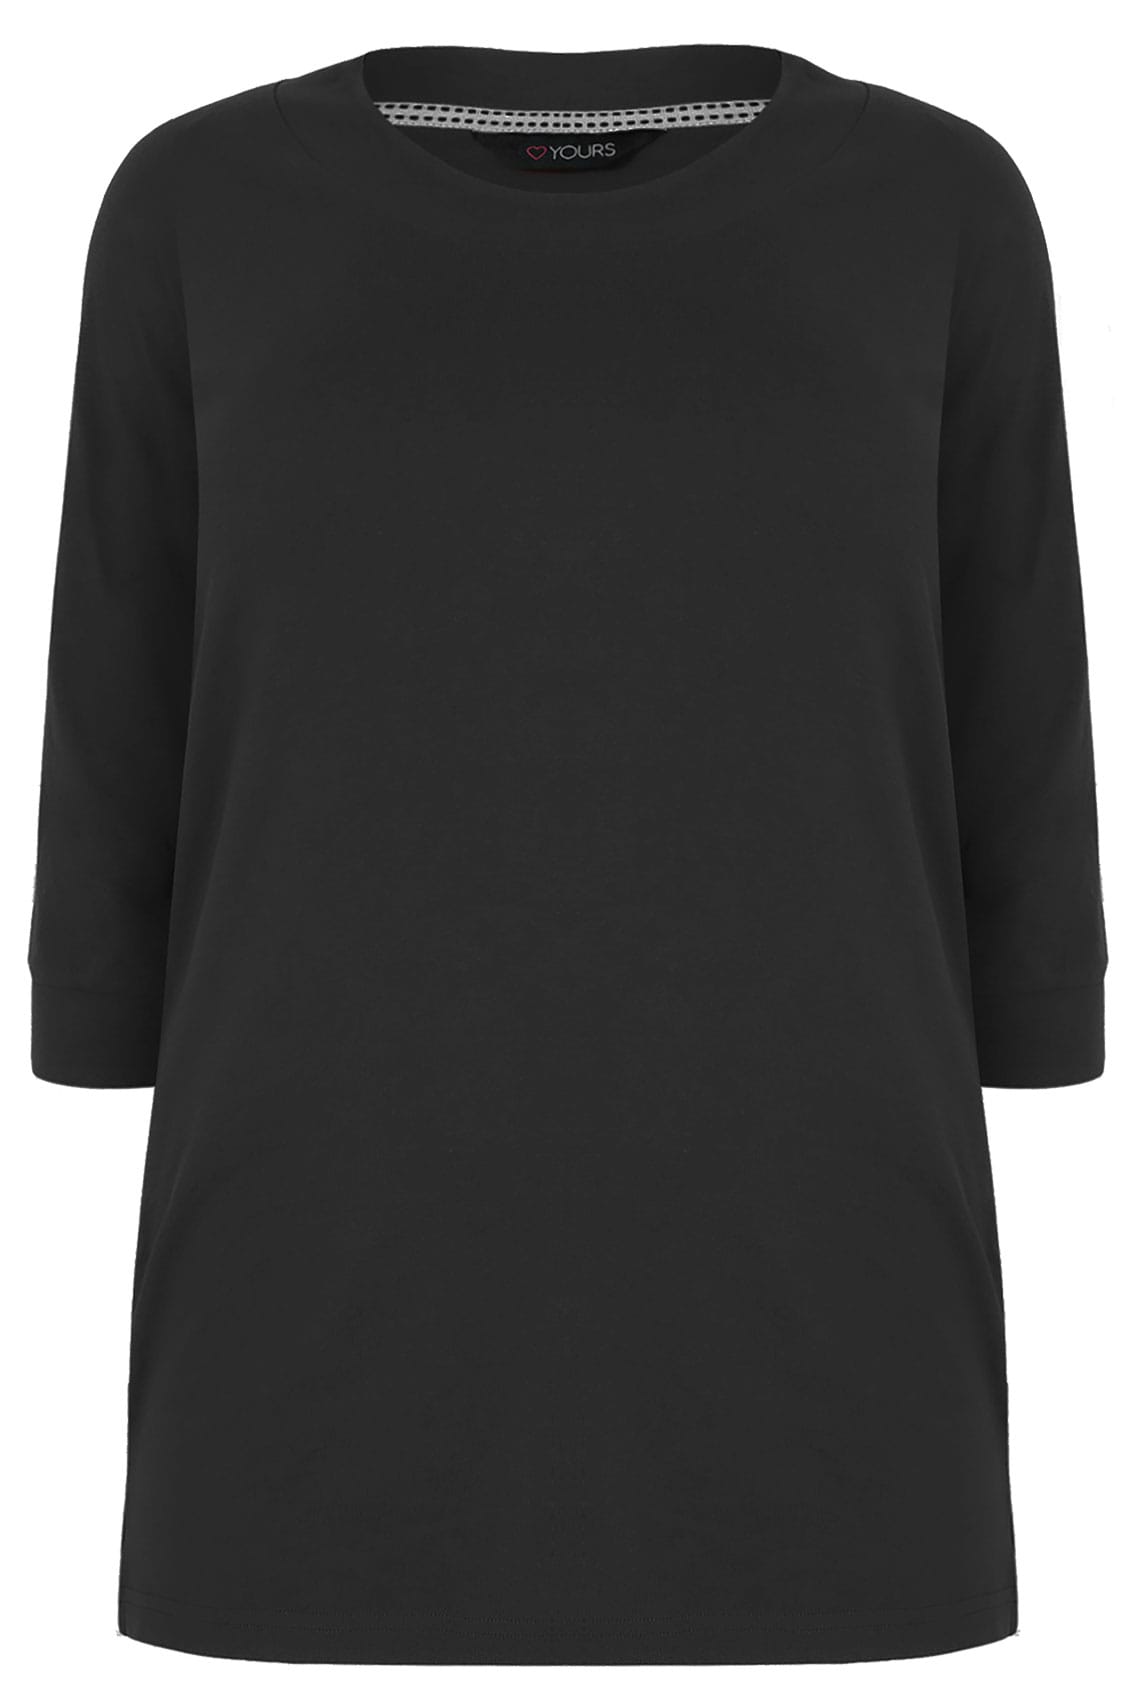 Black Band Scoop Neckline T Shirt With 3 4 Sleeves Plus